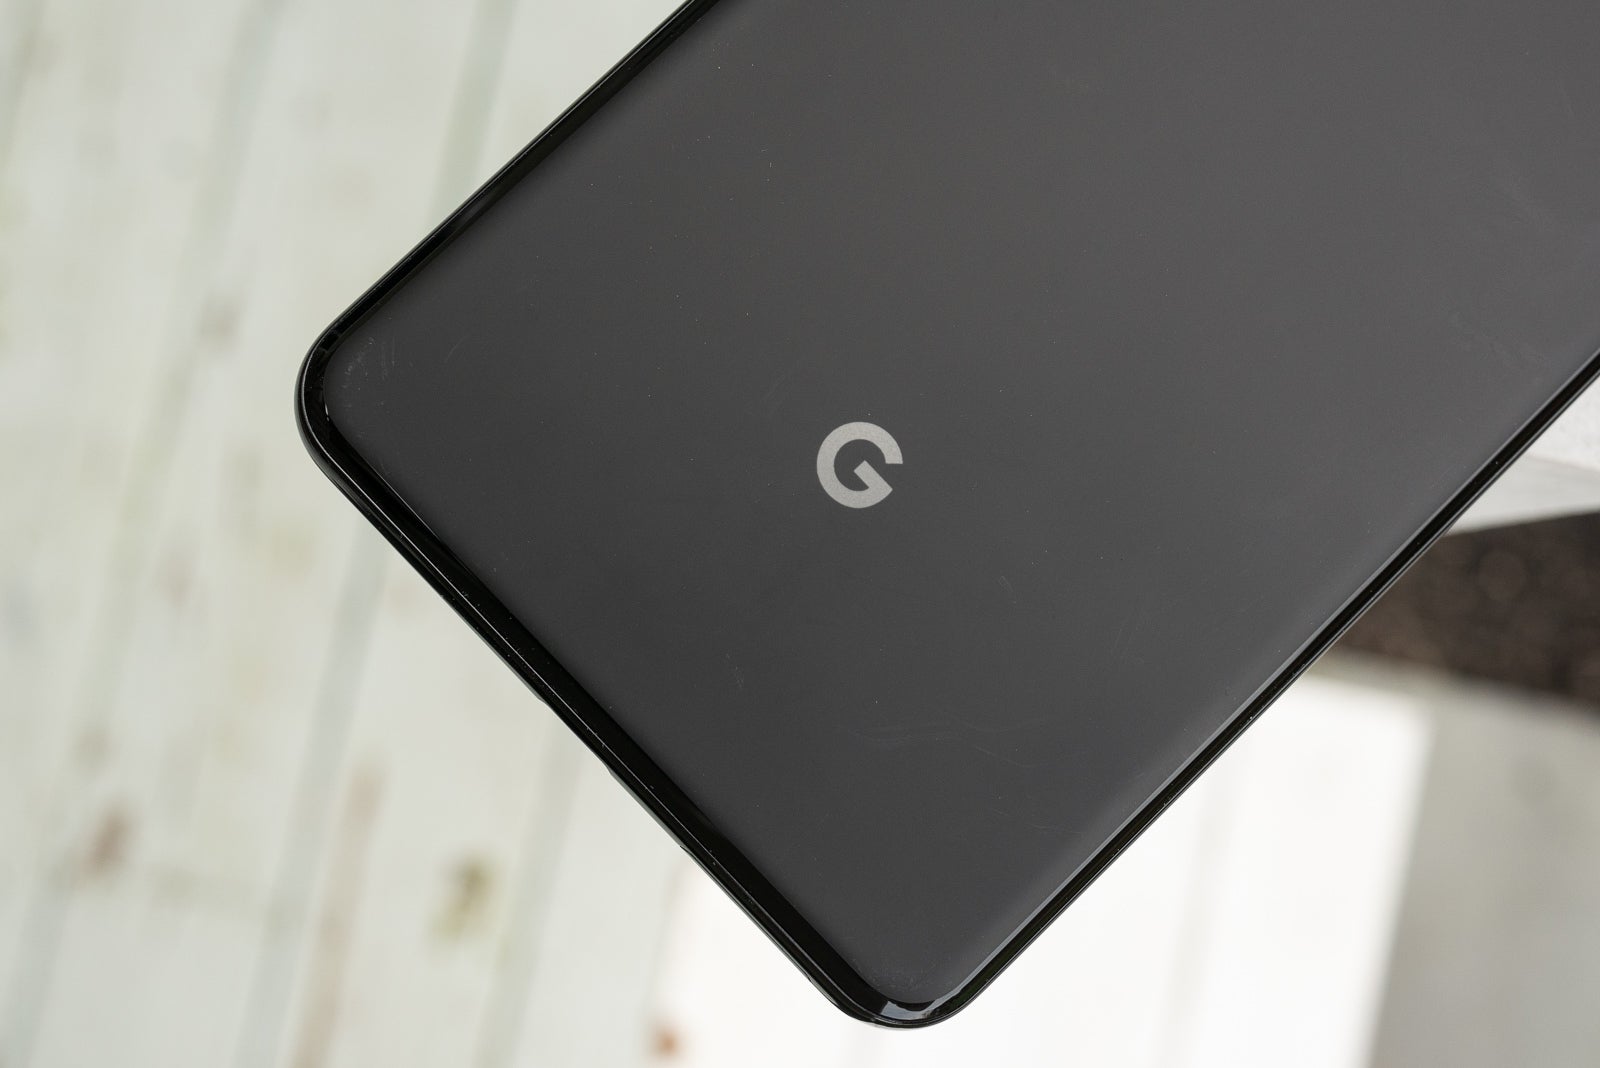 The Google "Pixel 4" was just mentioned for the first time